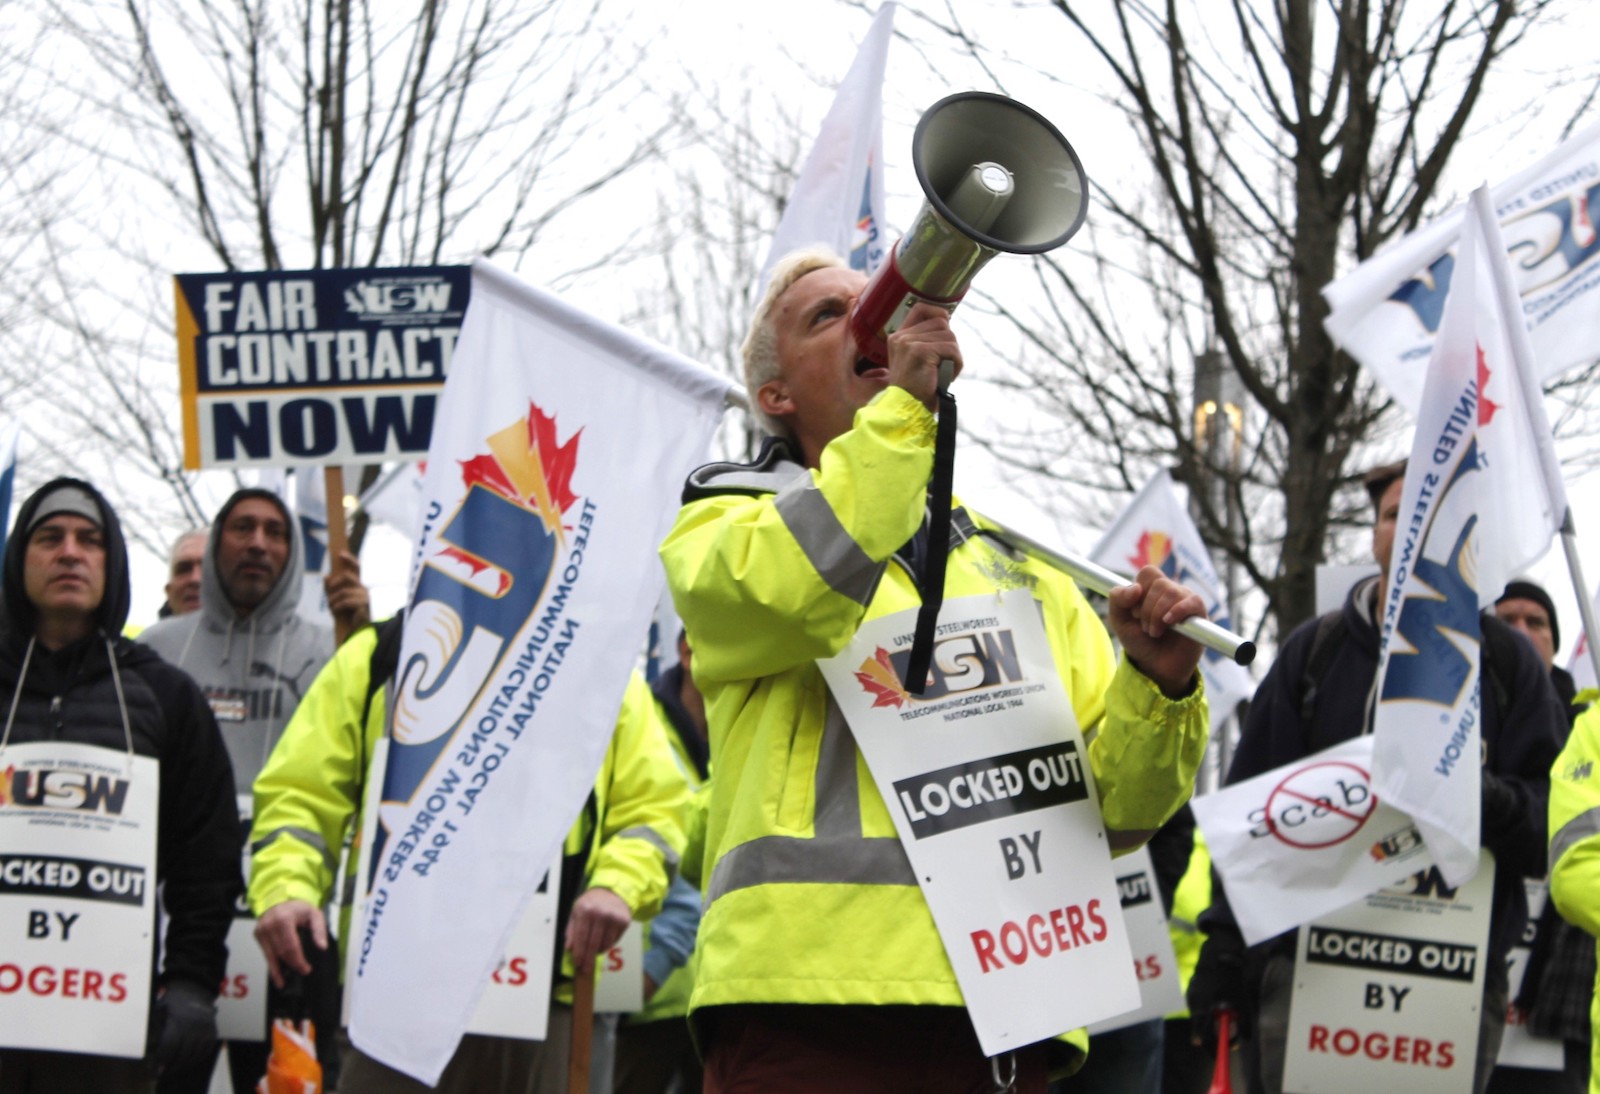 A white man with light-coloured hair speaks into a megaphone on a grey fall day. Behind him other men are lined up wearing signs that say 'Locked Out.'